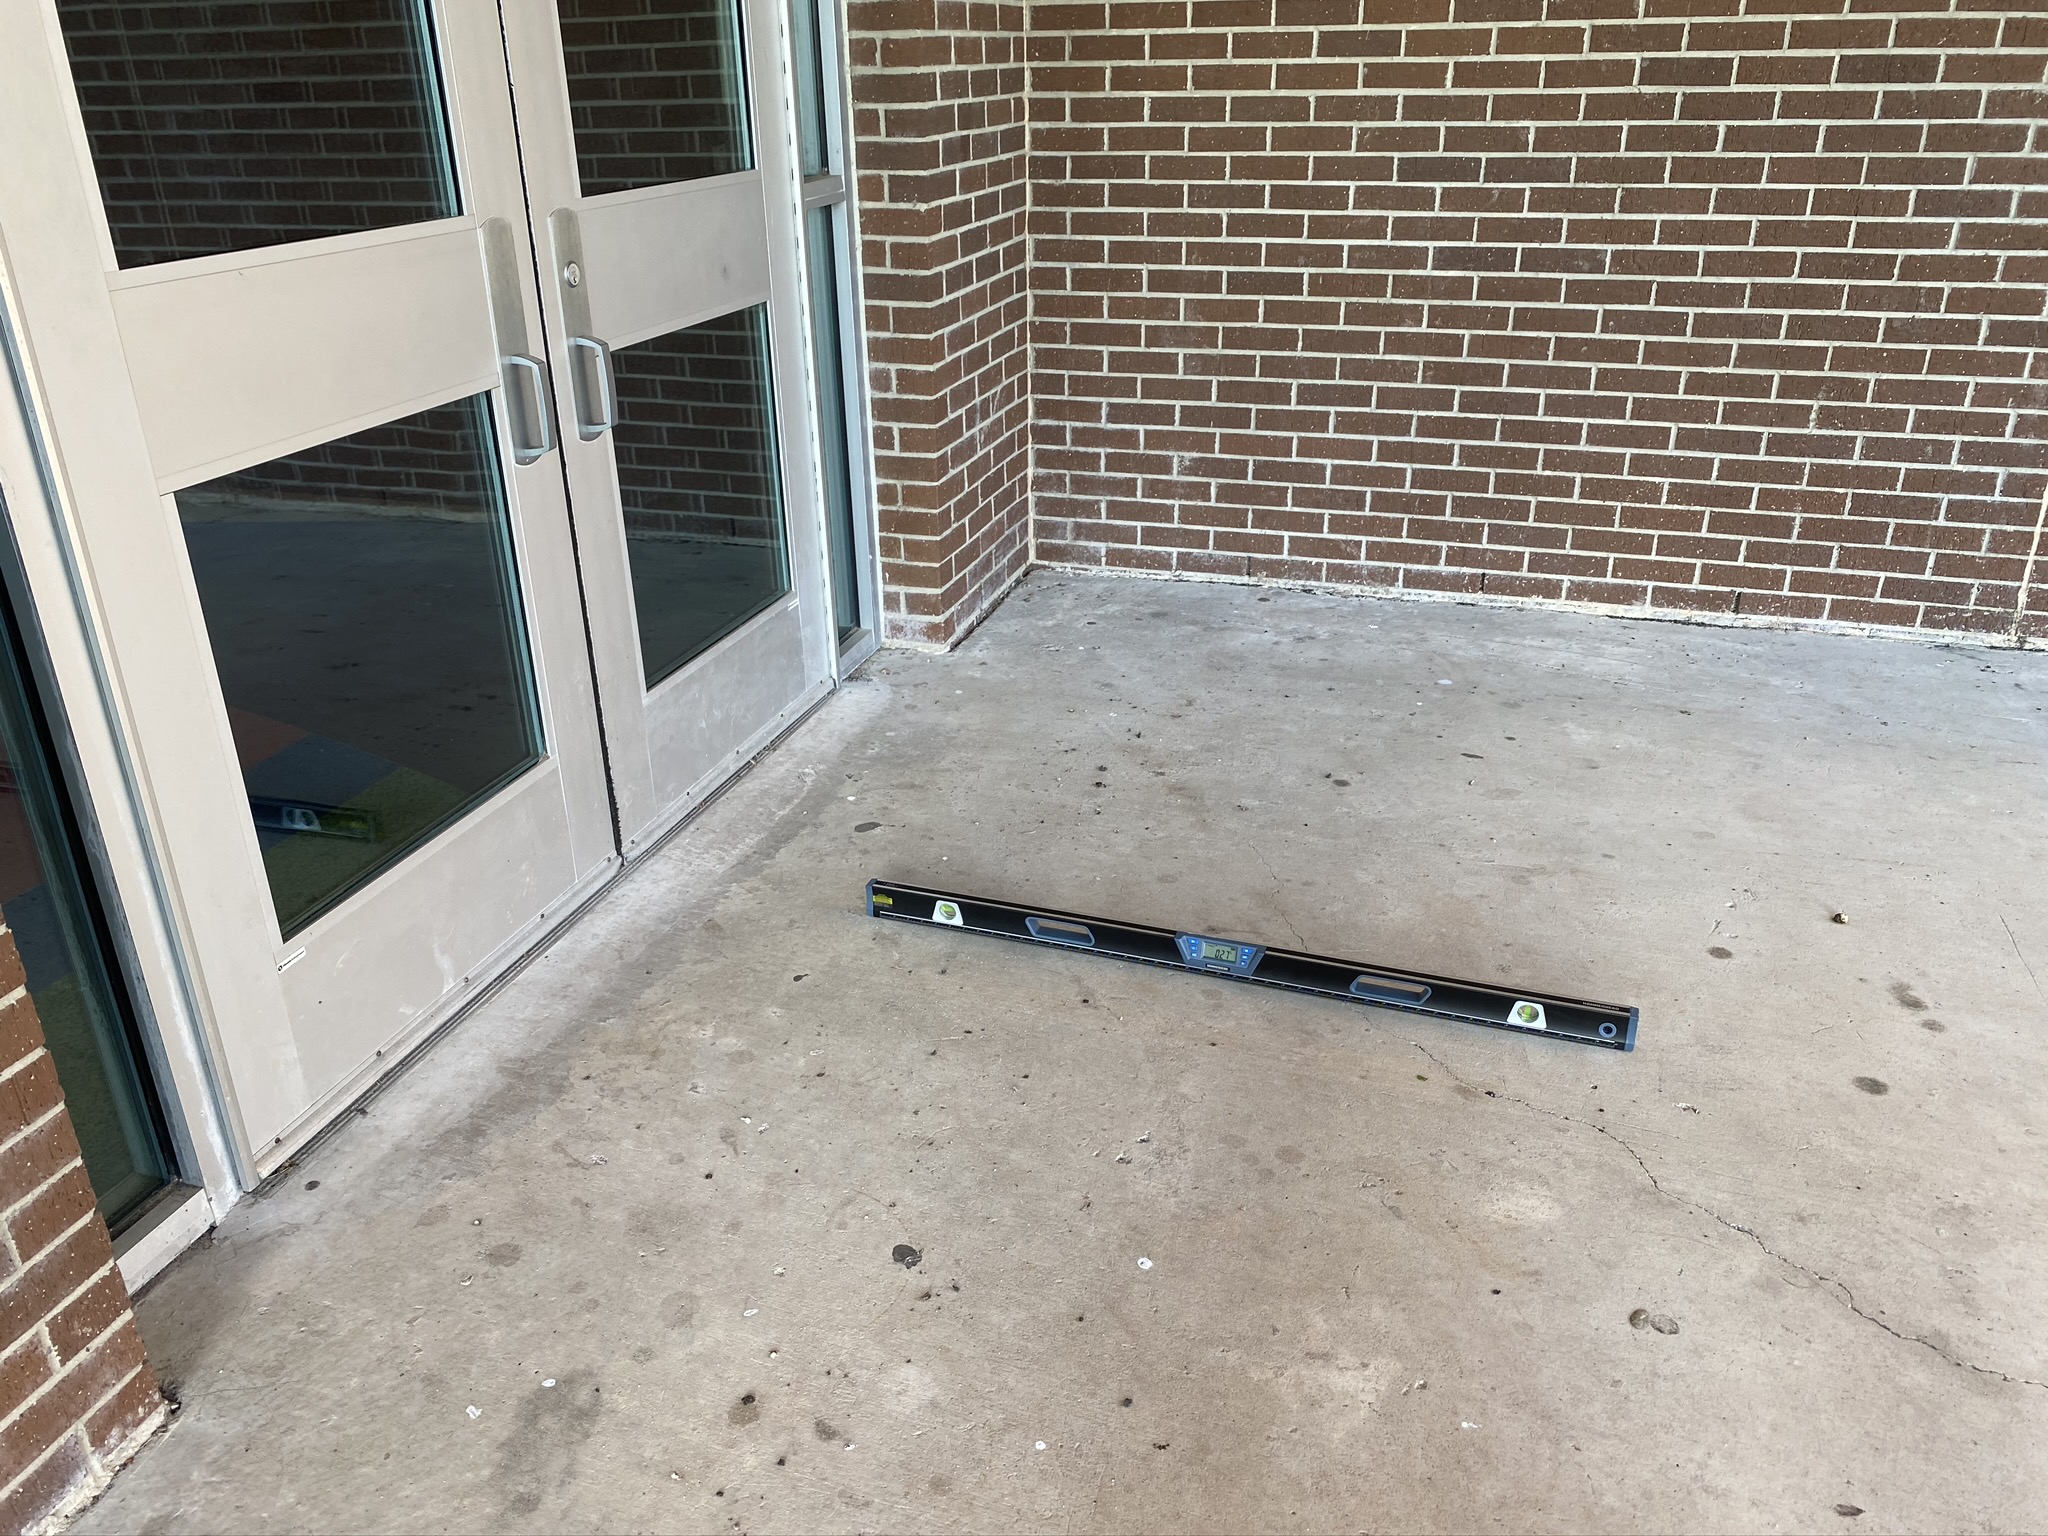 Picture of a door with concrete sidewalk and level to measure percent slope away from the door.